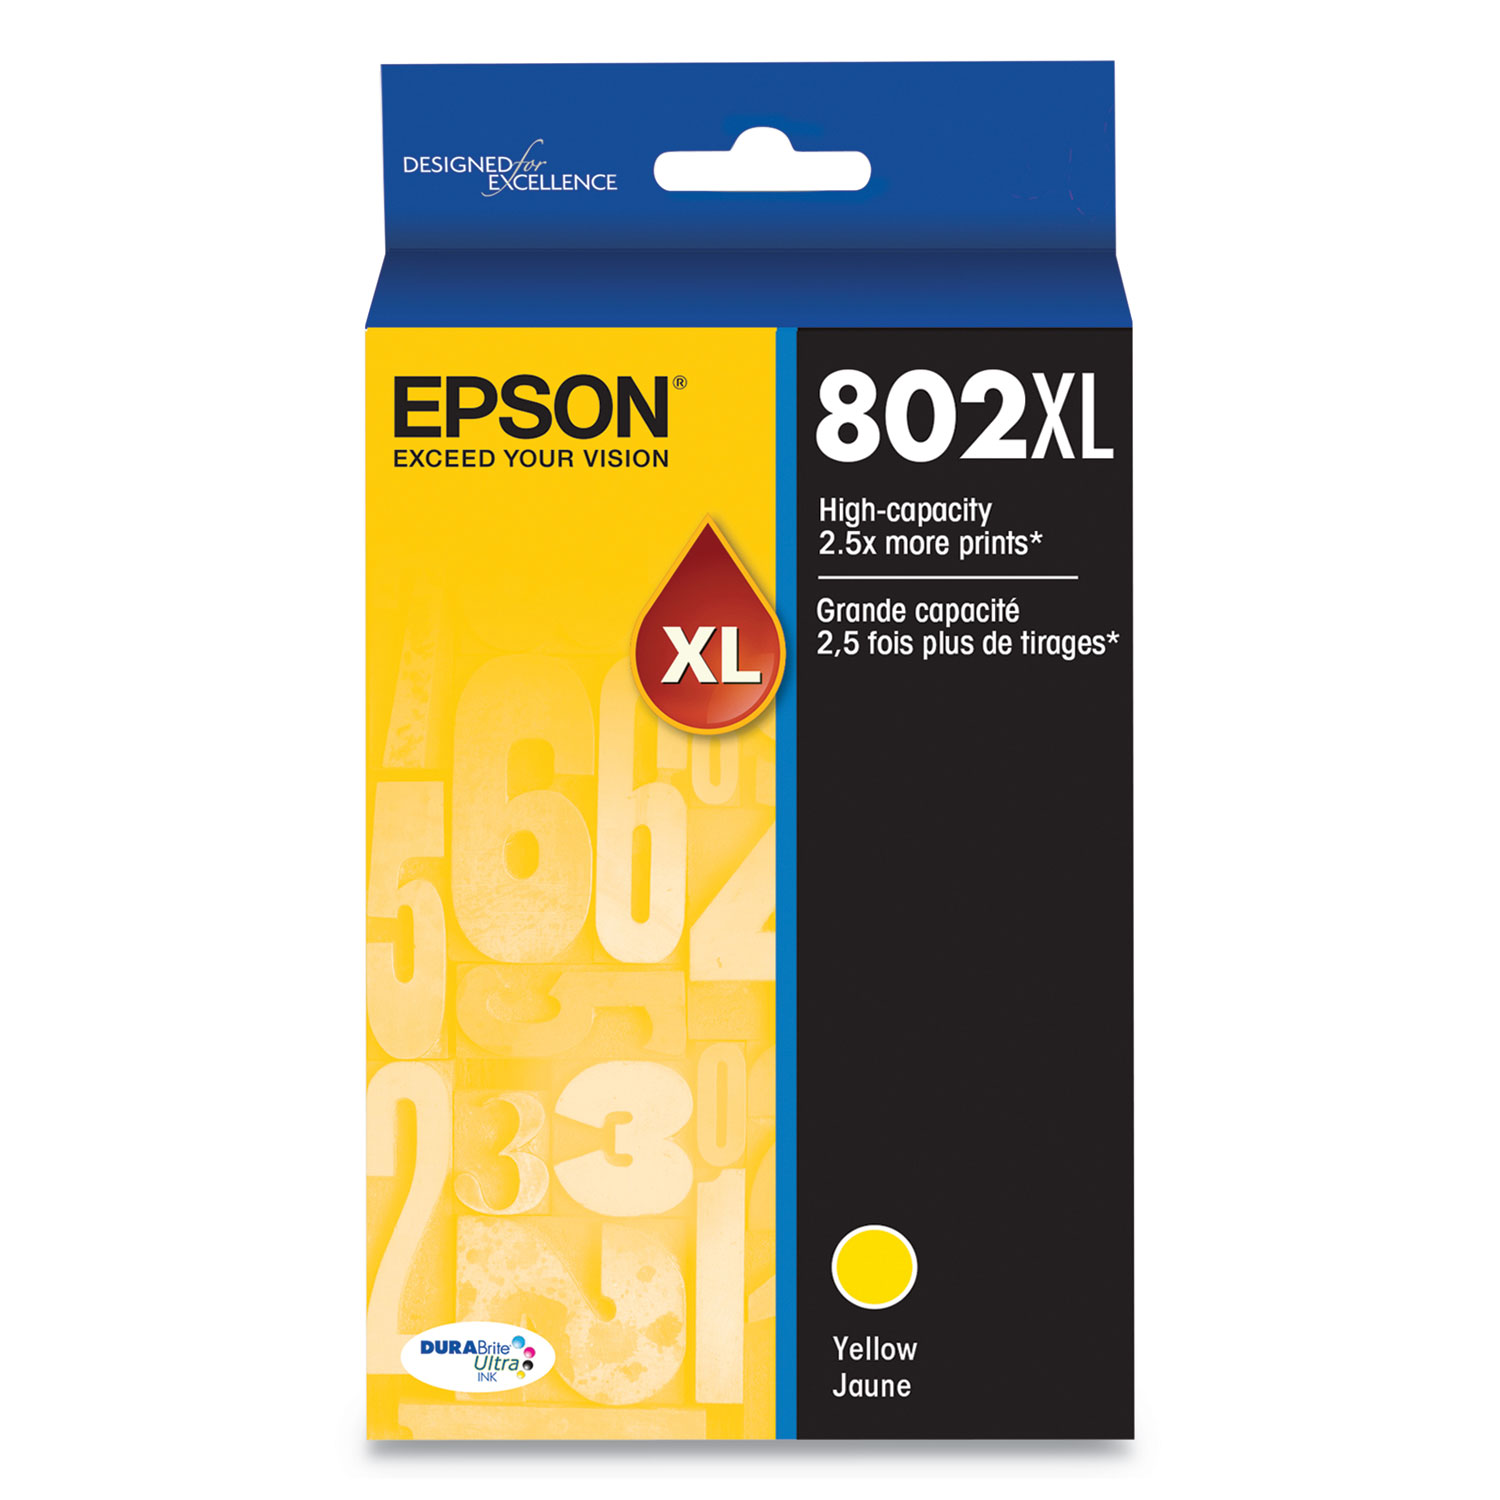  Epson T802XL420-S T802XL420S (802XL) DURABrite Ultra High-Yield Ink, 1900 Page-Yield, Yellow (EPST802XL420S) 